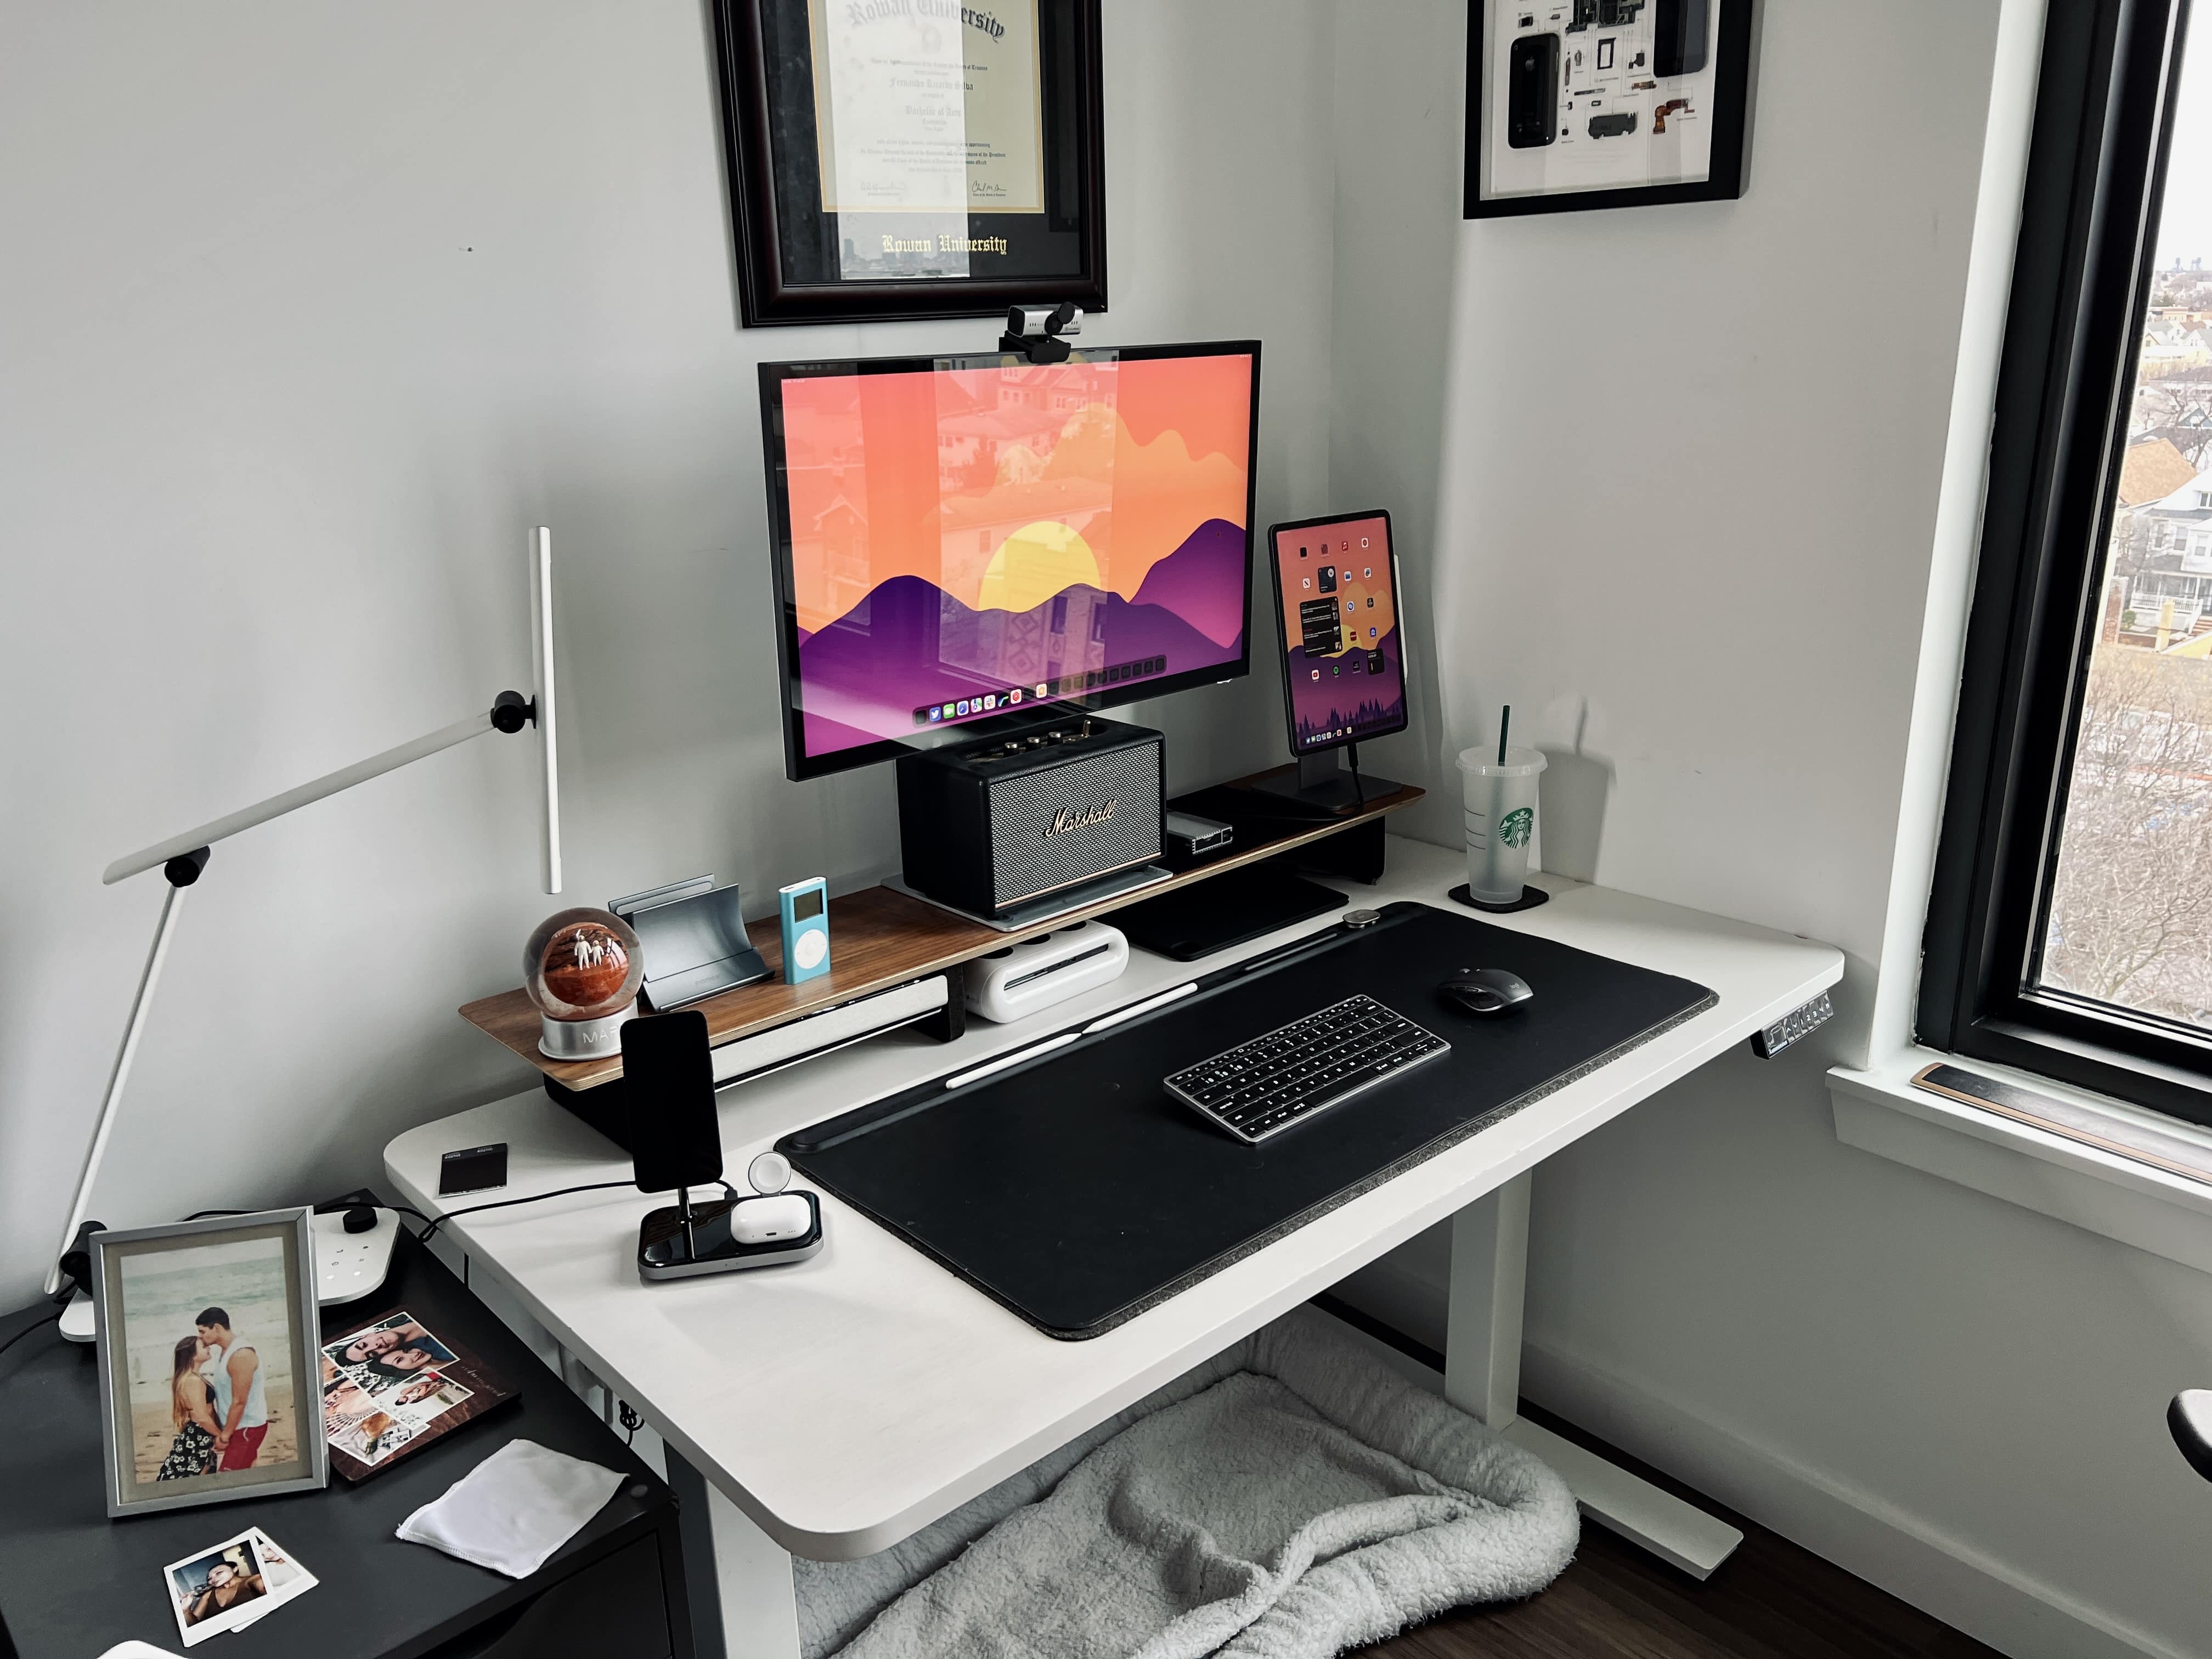 How I built my desk setup entirely around using iPad as a computer